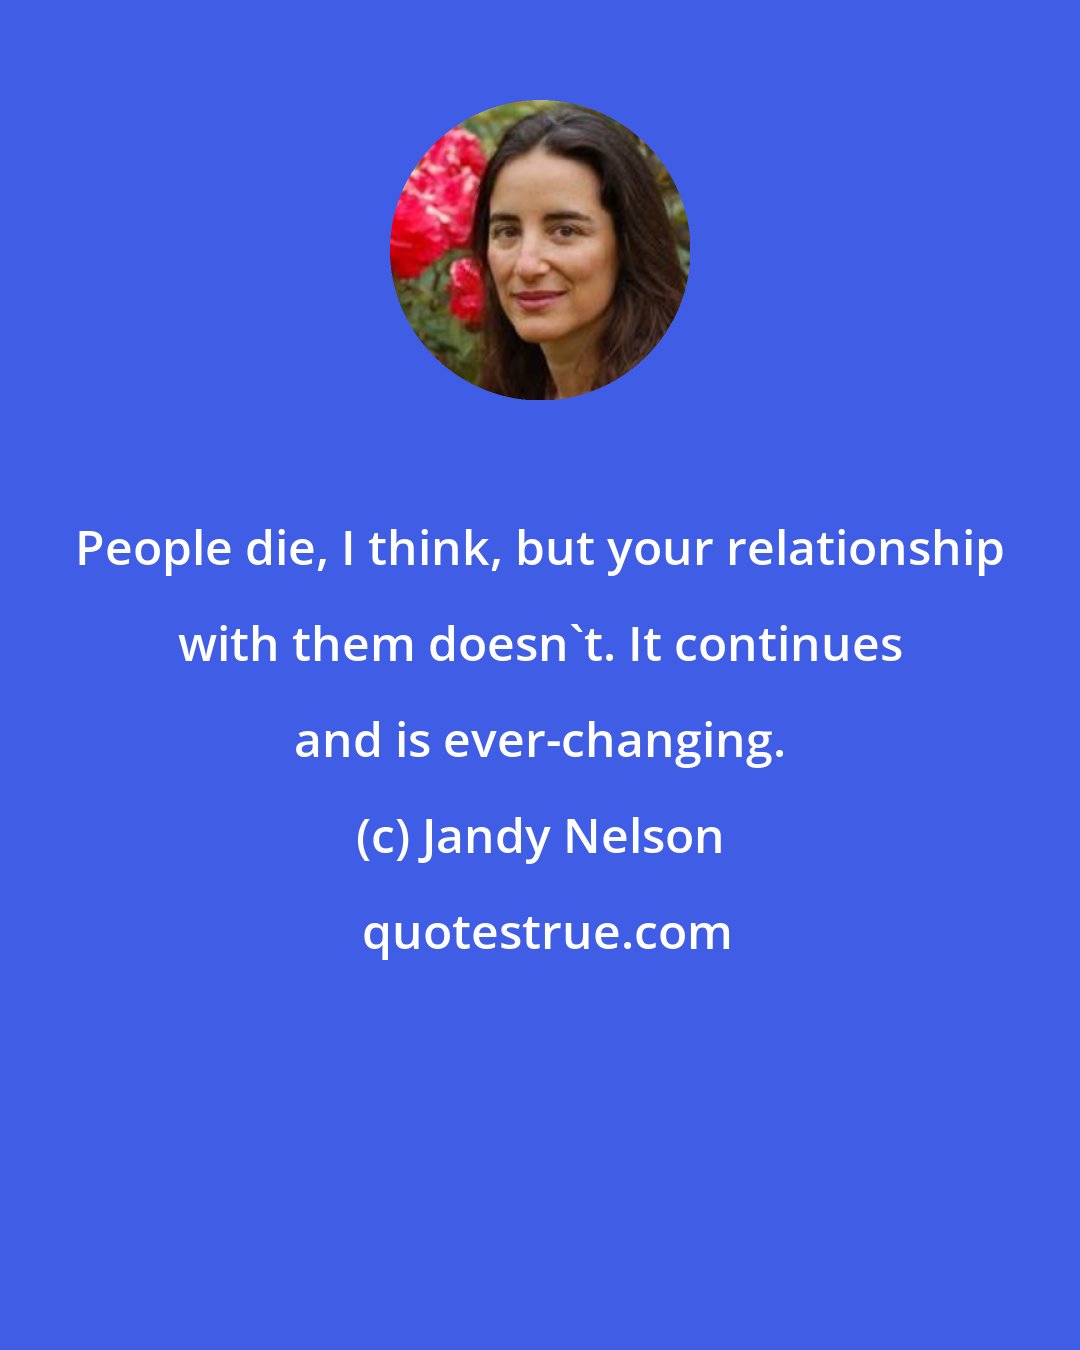 Jandy Nelson: People die, I think, but your relationship with them doesn't. It continues and is ever-changing.